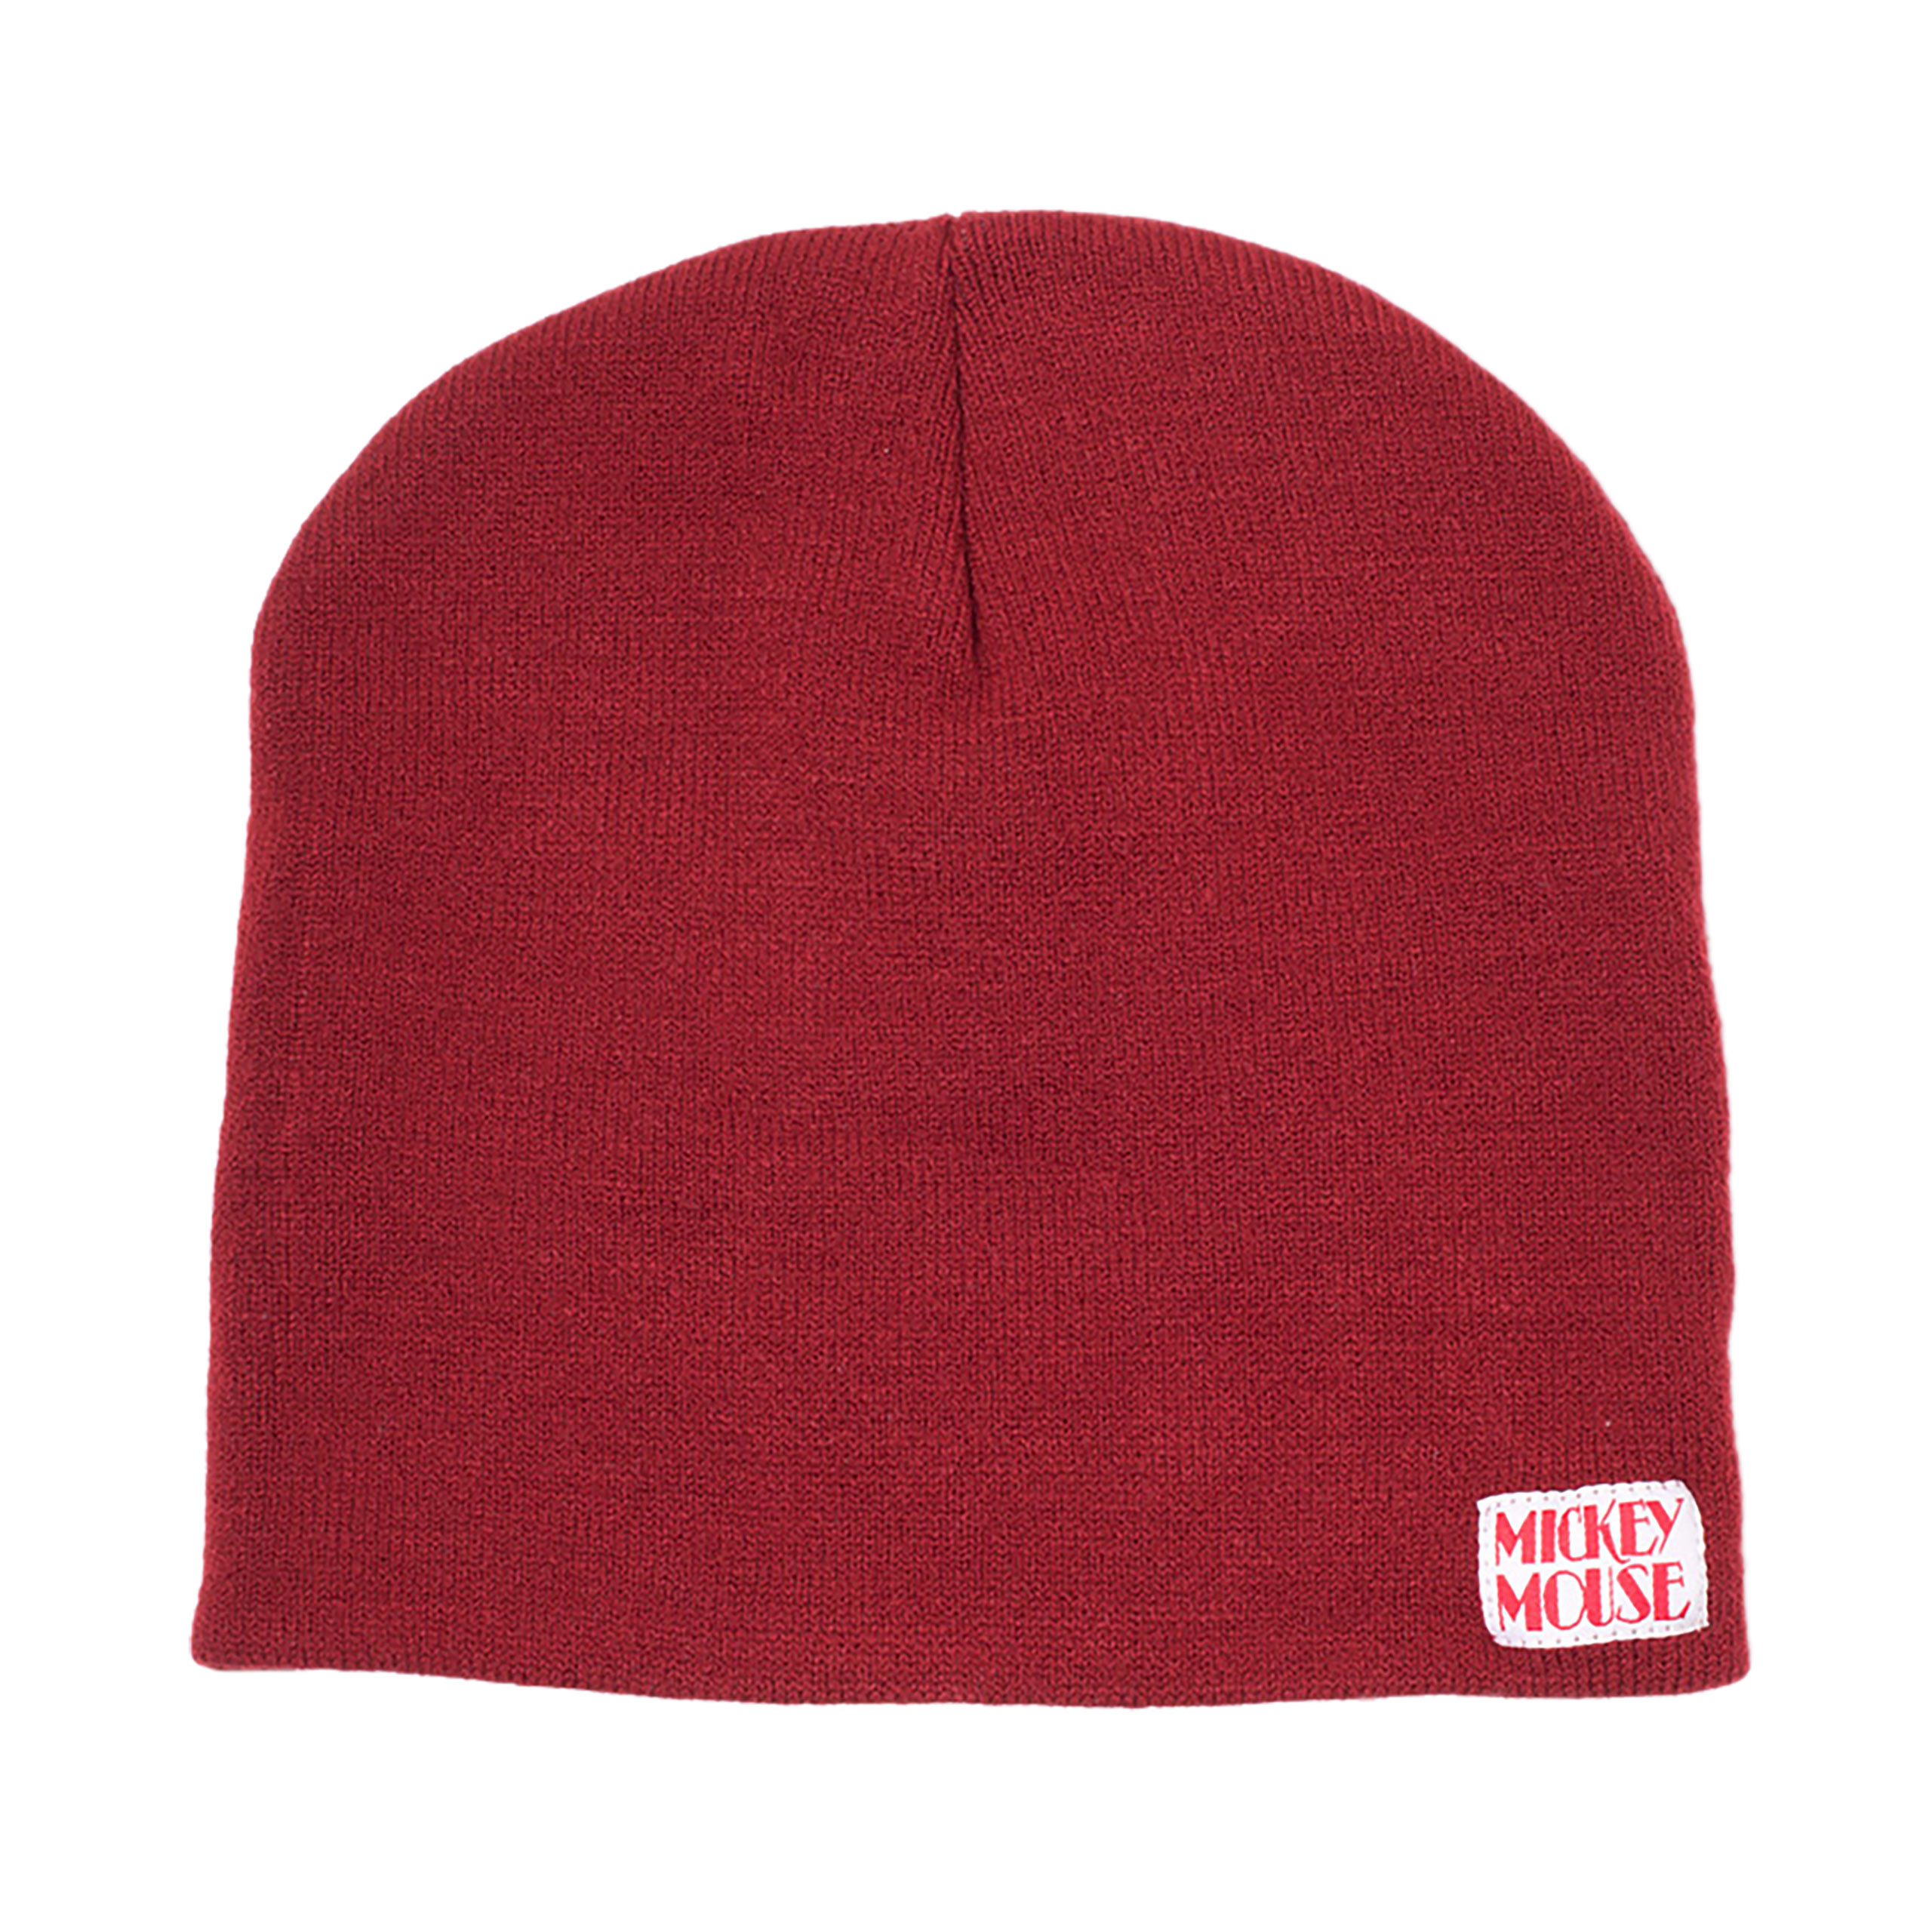 Mickey Mouse - Red Beanie